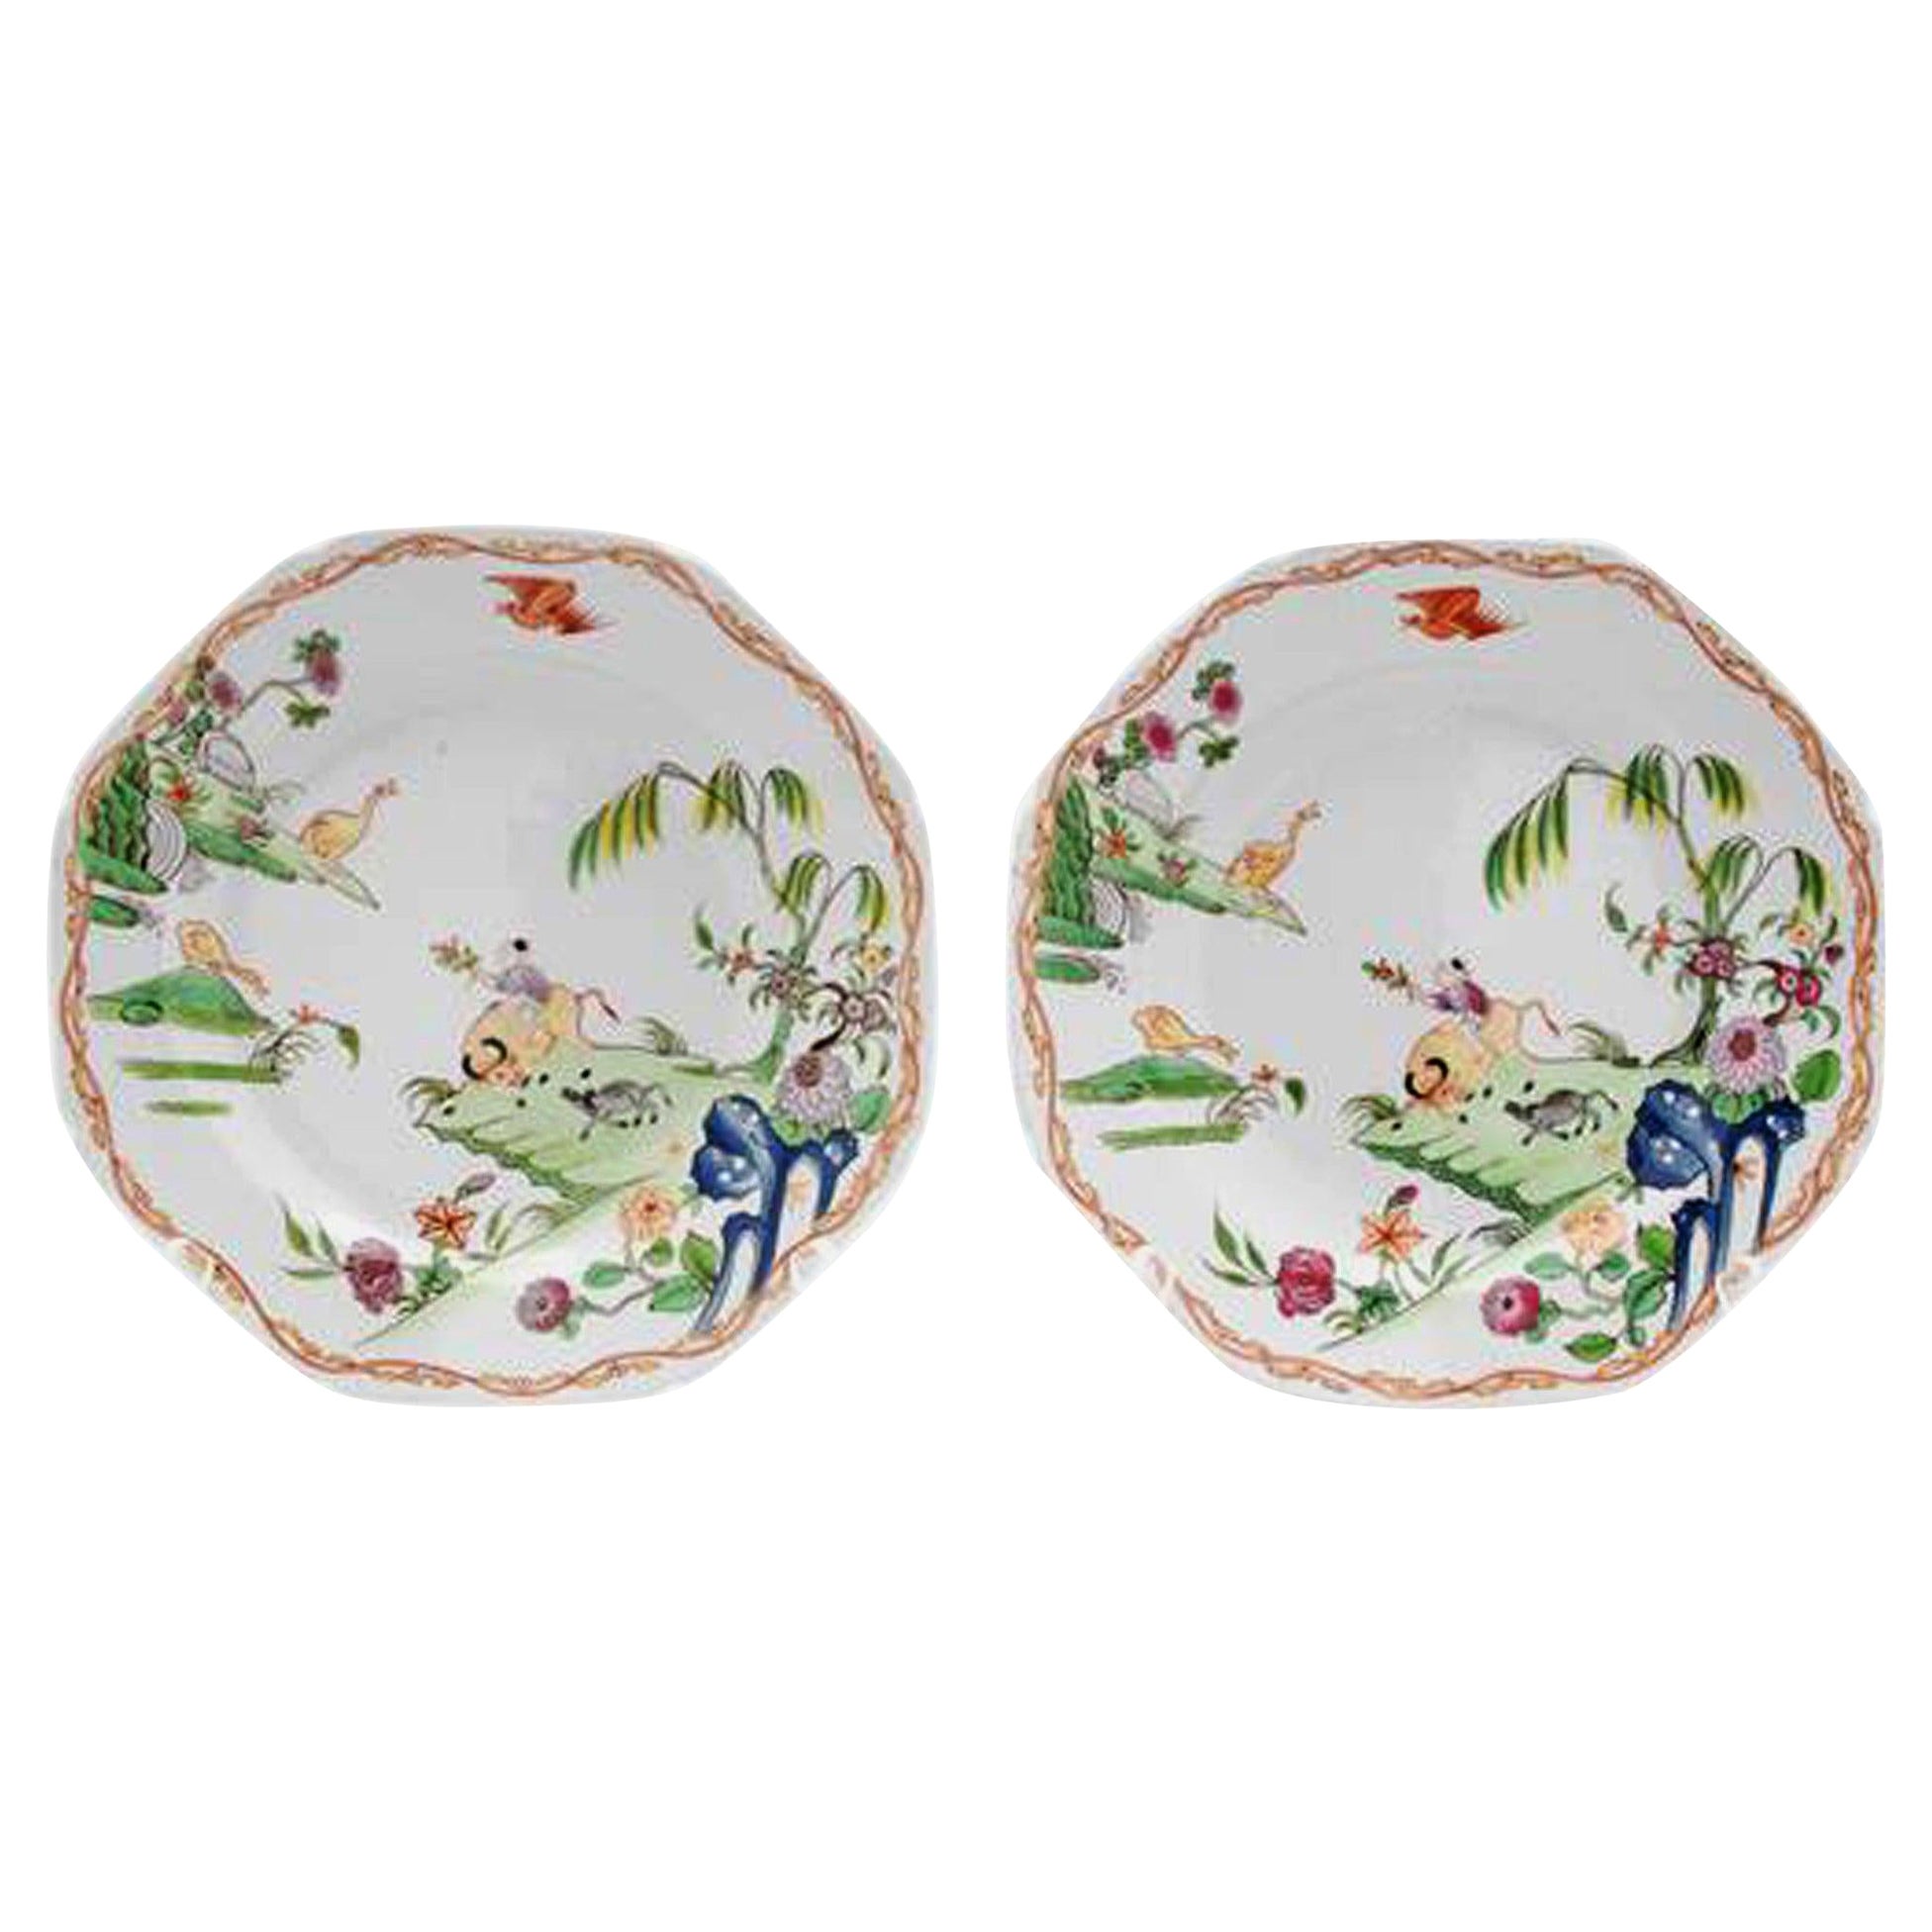 Porcelain Chinoiserie Plates with the Boy and Buffalo Pattern, Attr. Miles Mason For Sale